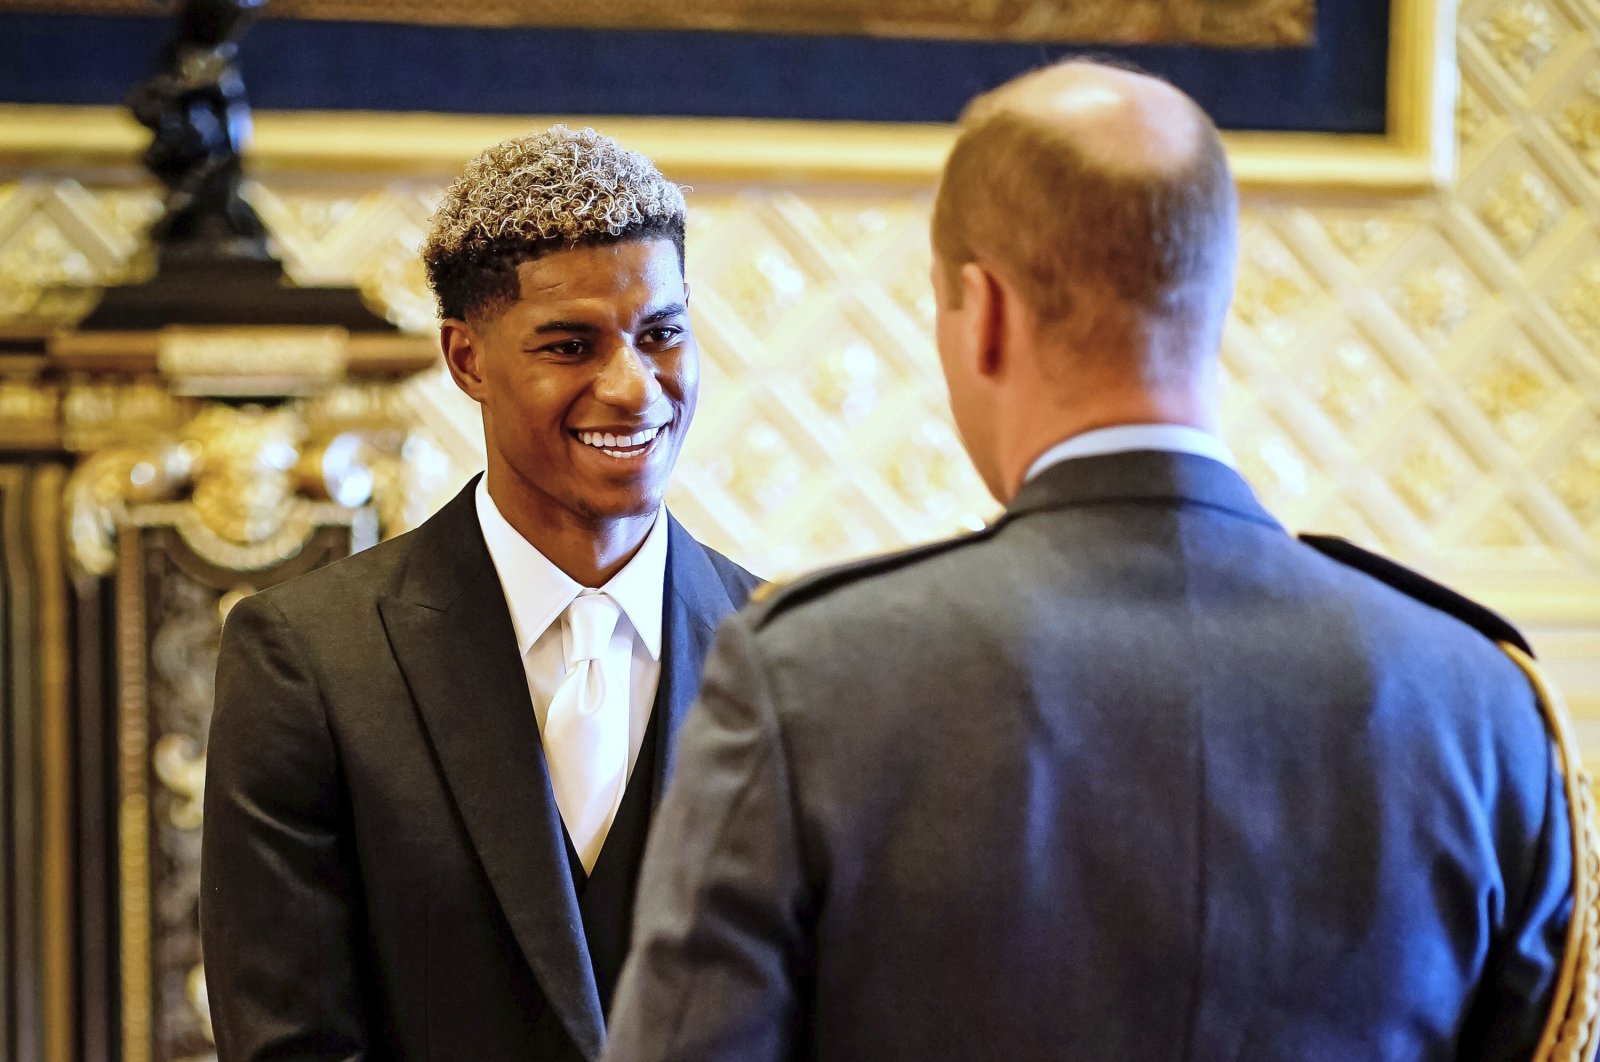 Footballer Marcus Rashford (L) is made an MBE (Member of the Order of the British Empire) by Britain's Prince William during an investiture ceremony at Windsor Castle, England, Nov. 9, 2021. (AP Photo)